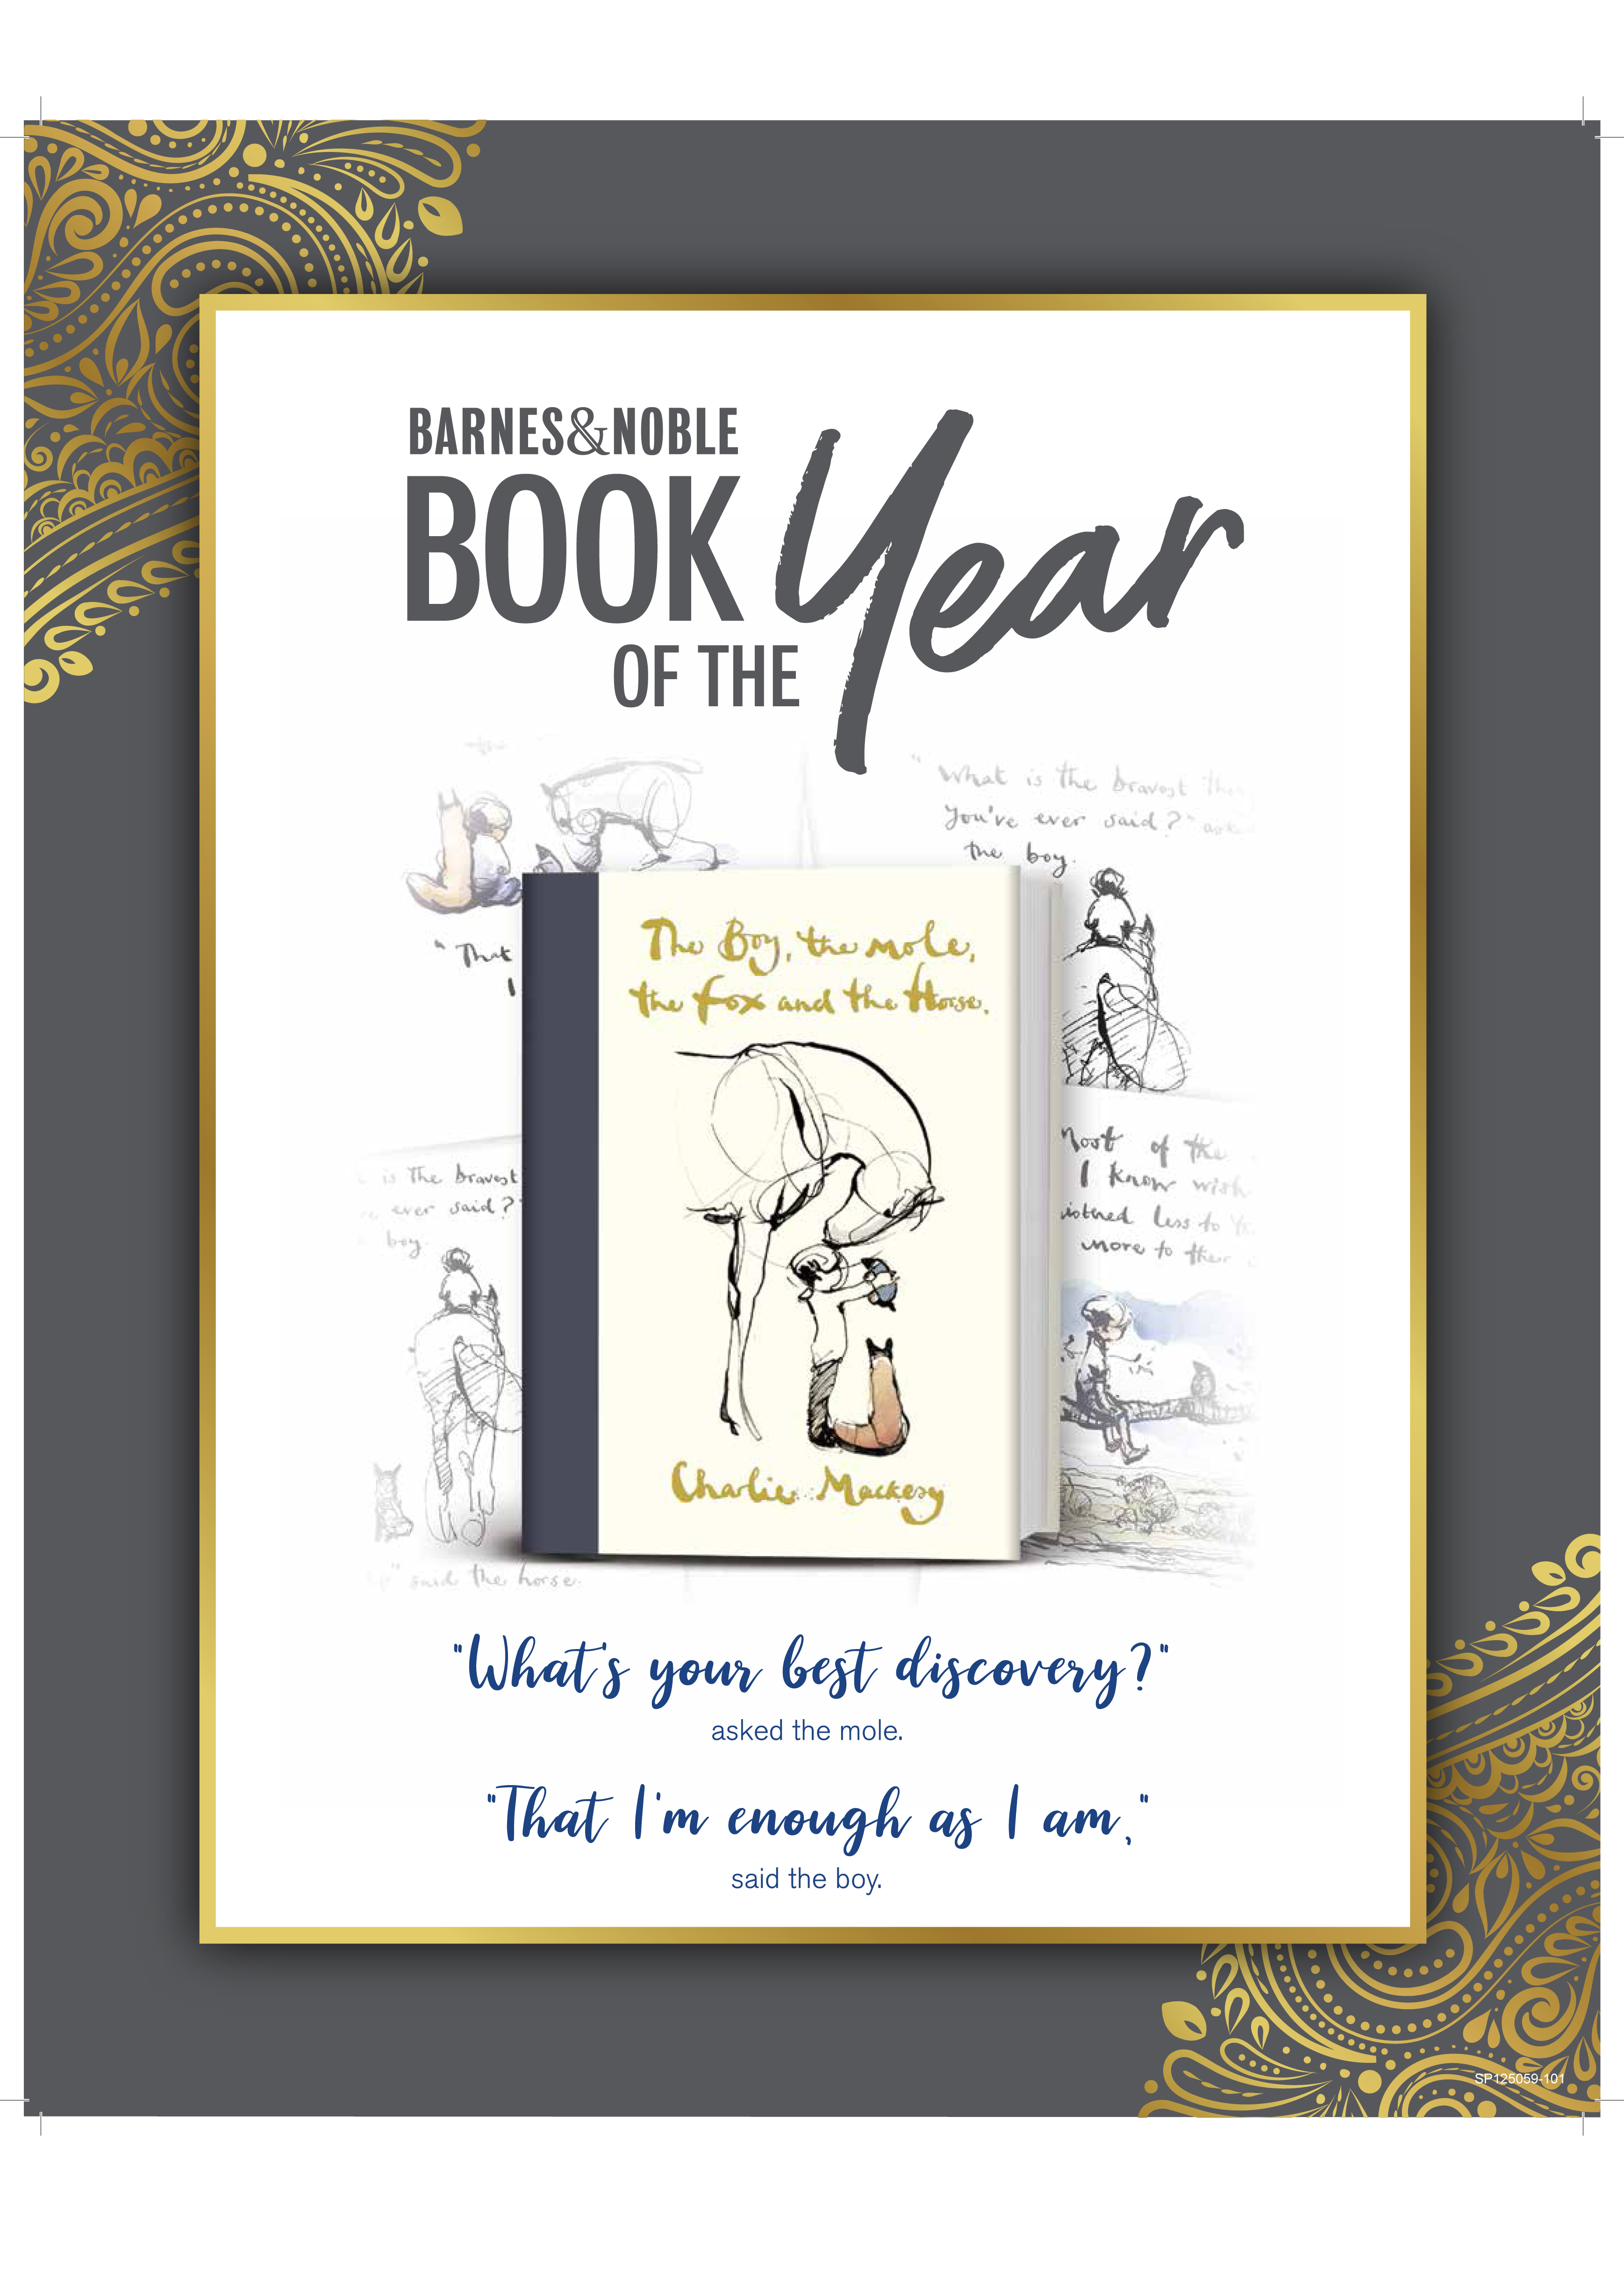 The Mole Barnes & Noble Book of the Year 2019 The Fox and The Horse The Boy